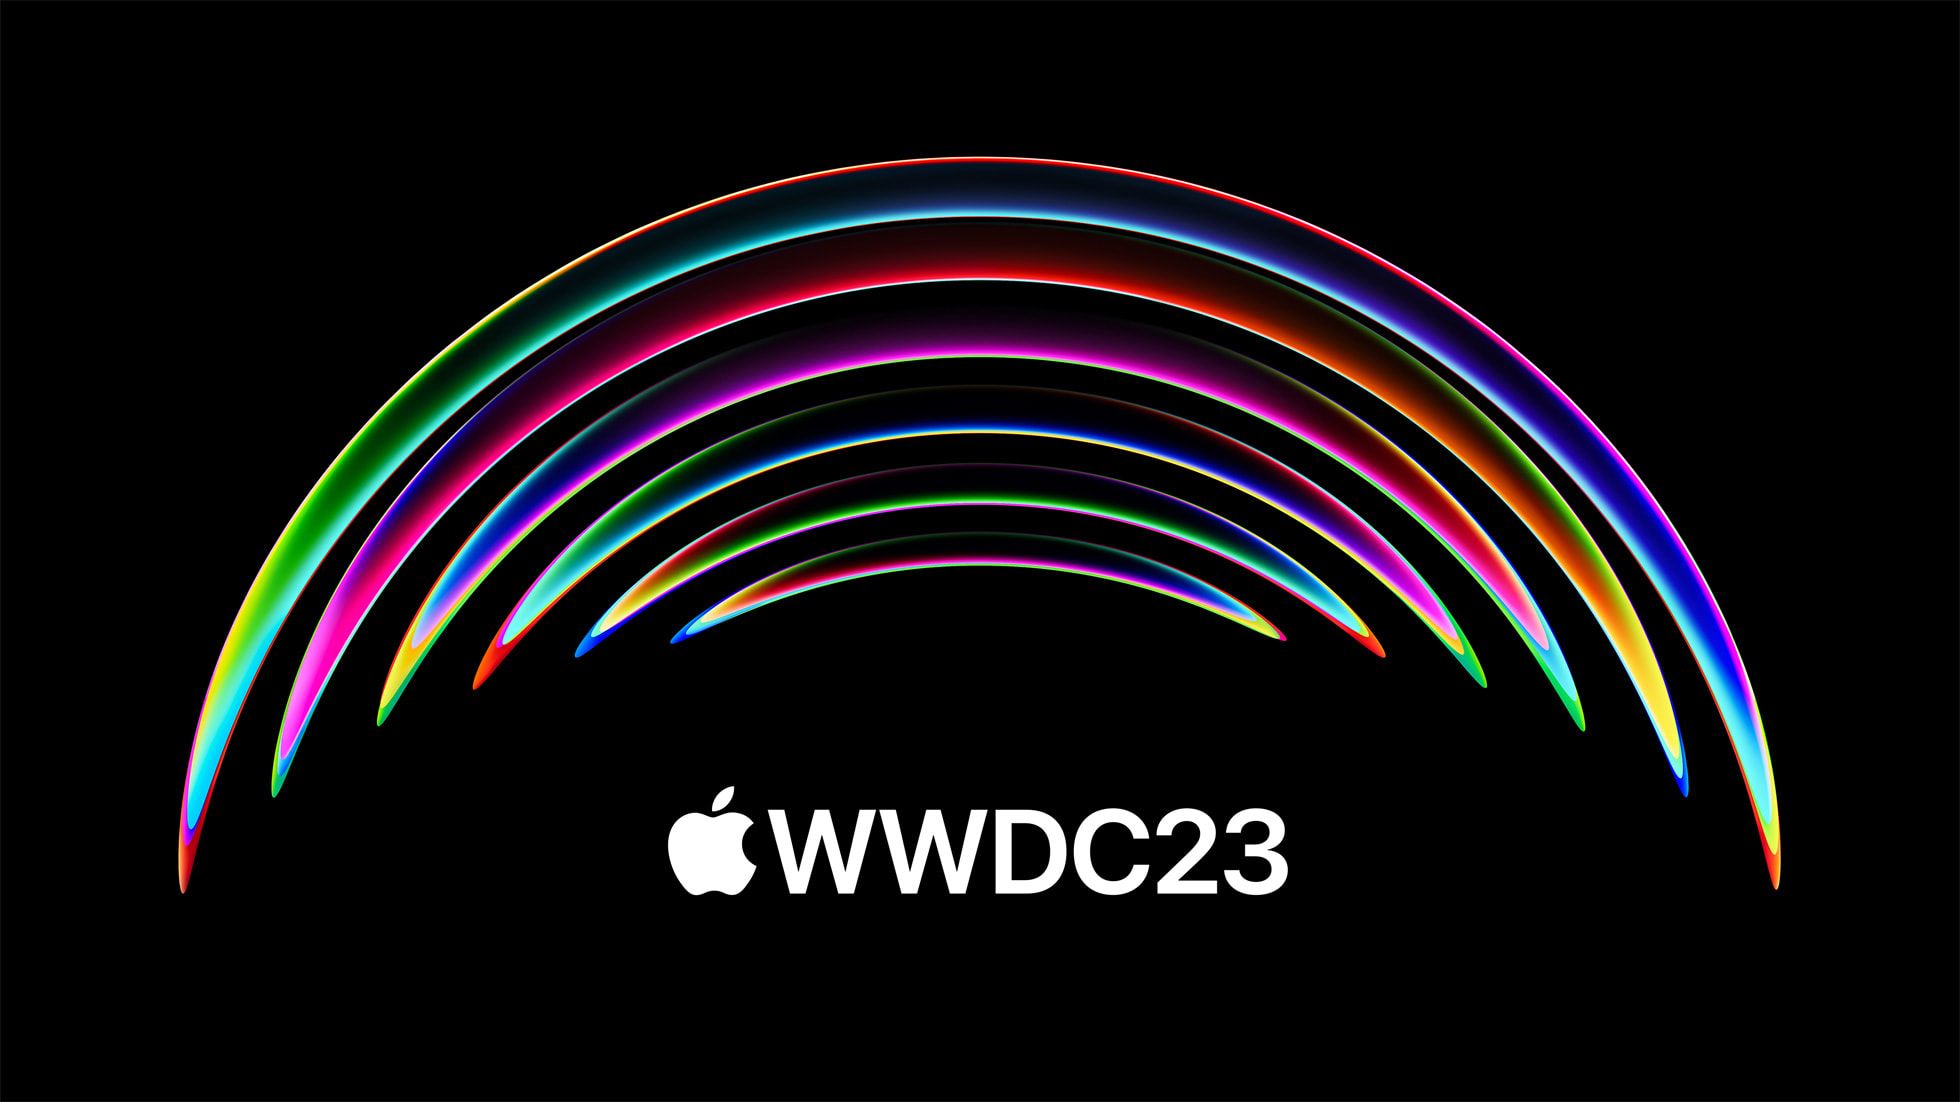 Apple sends out WWDC23 invitations for June 5